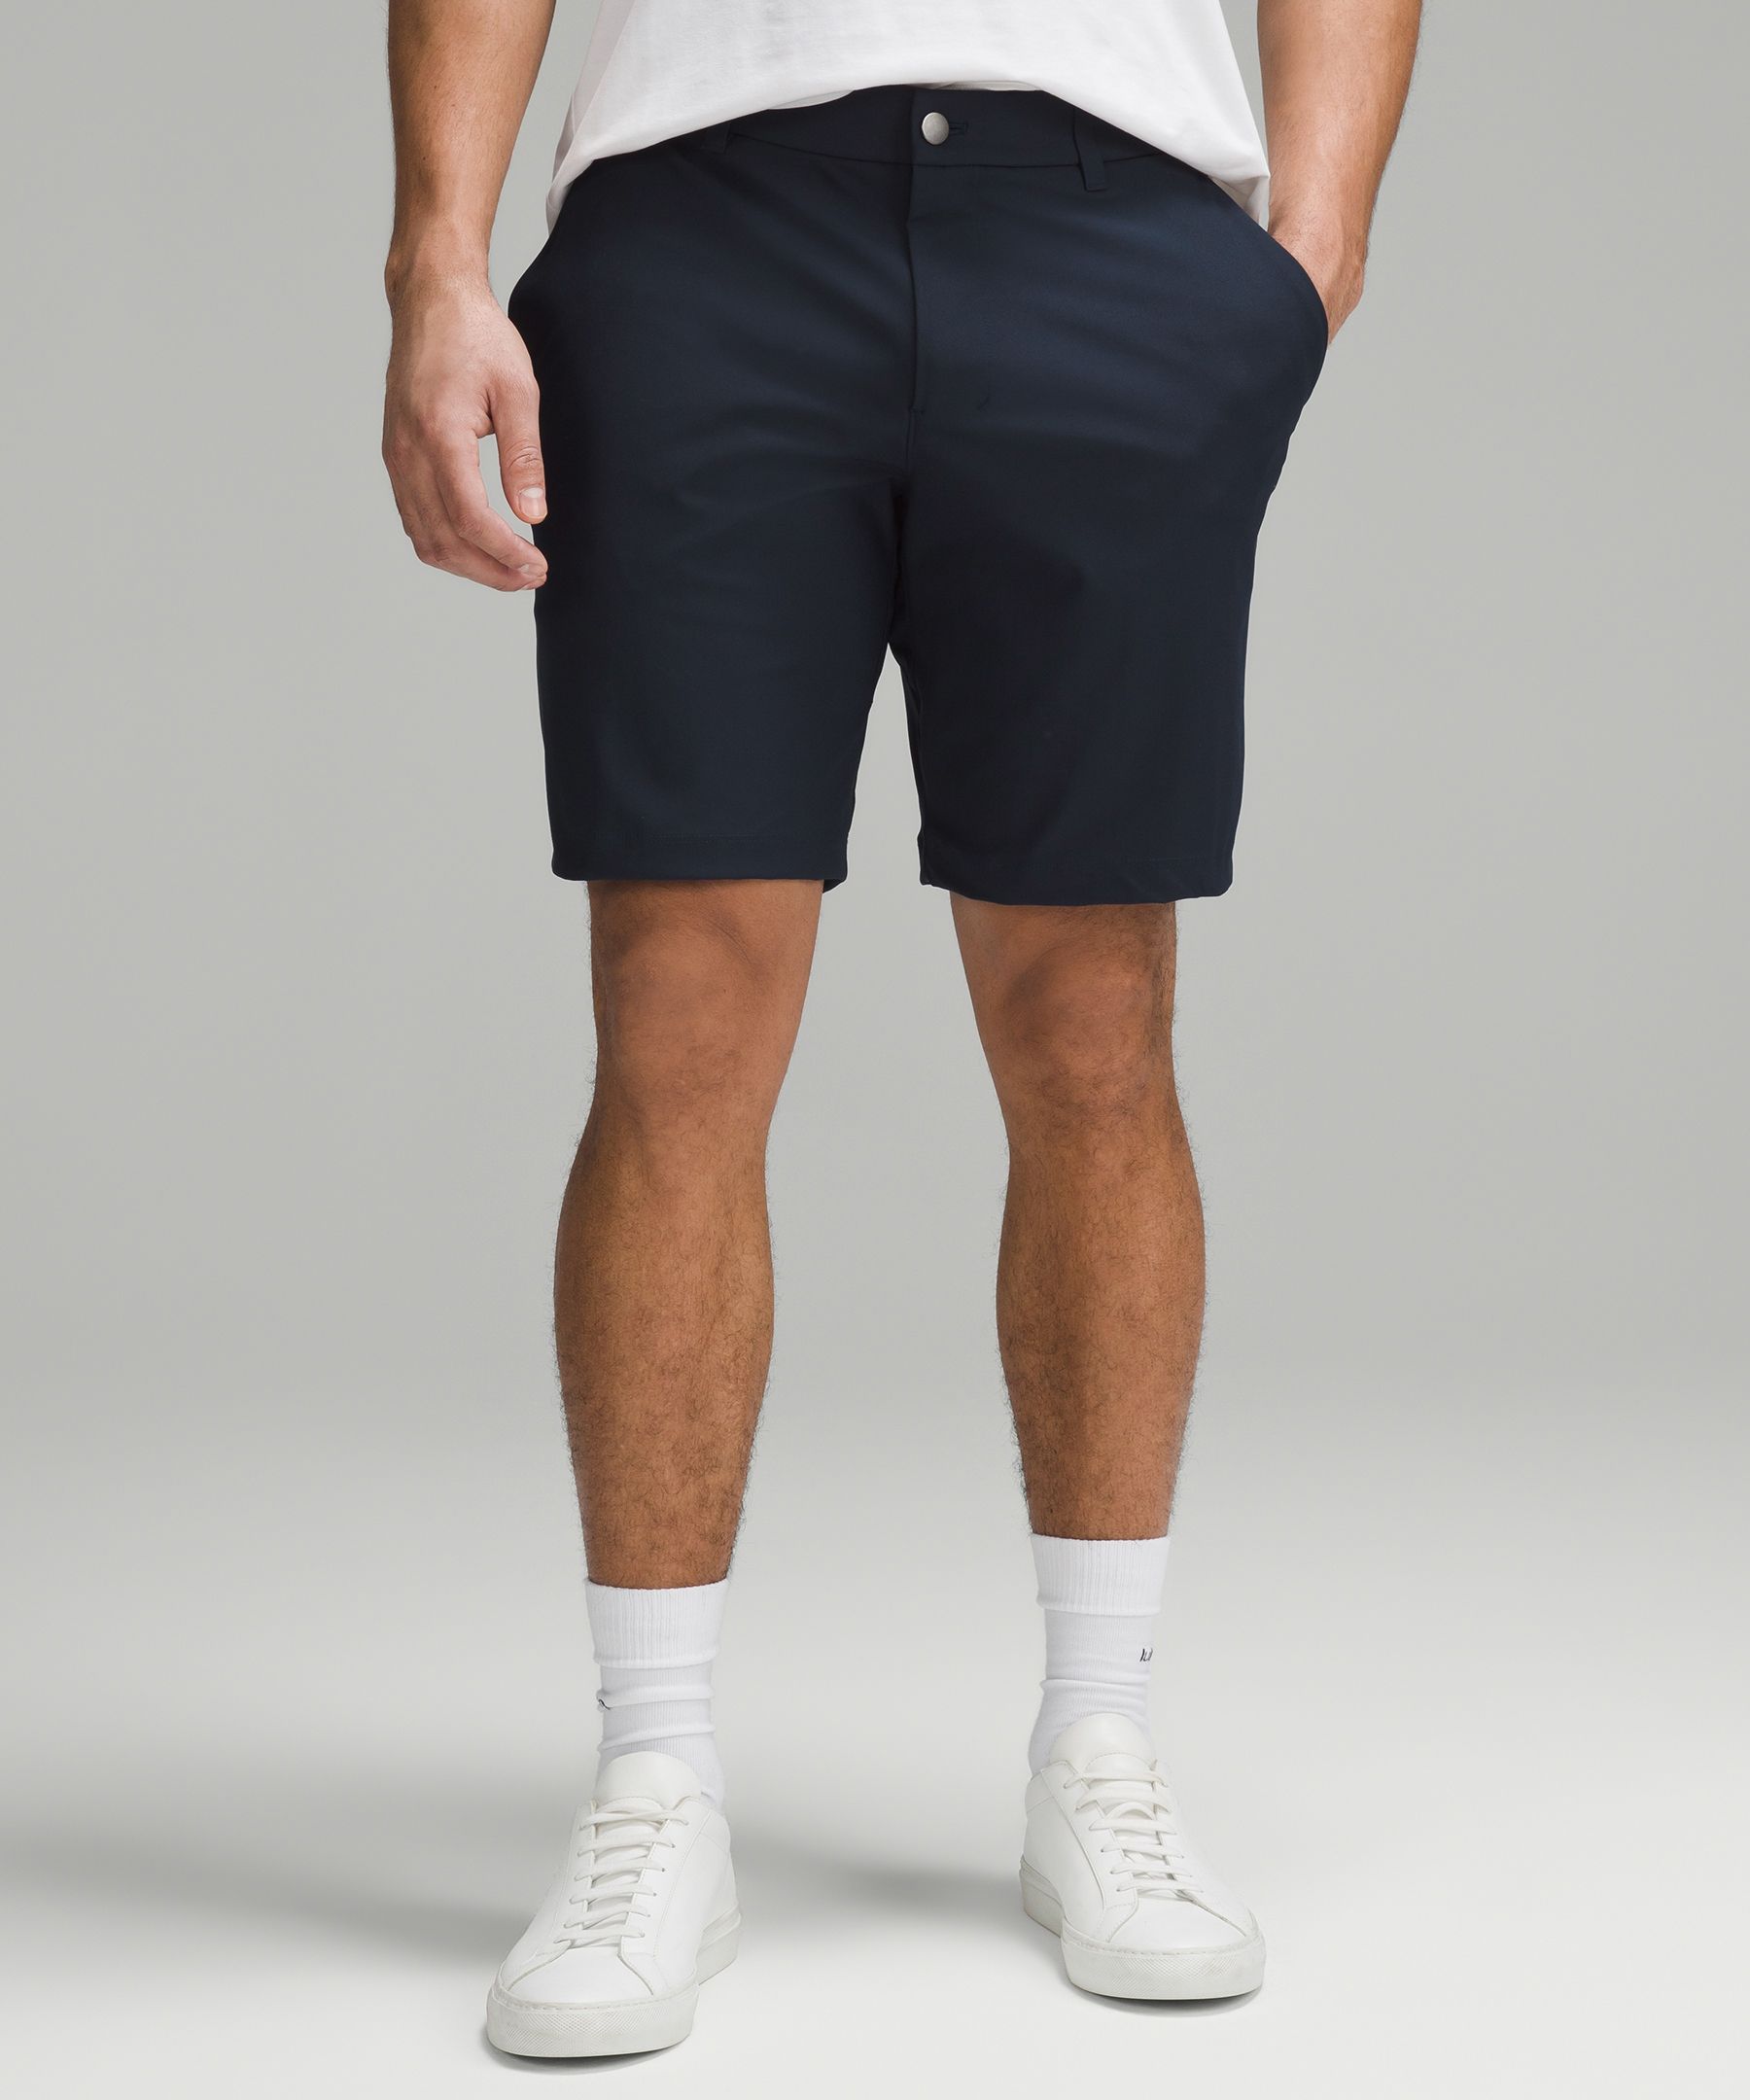 Find more Lululemon Seawheeze Shorts for sale at up to 90% off